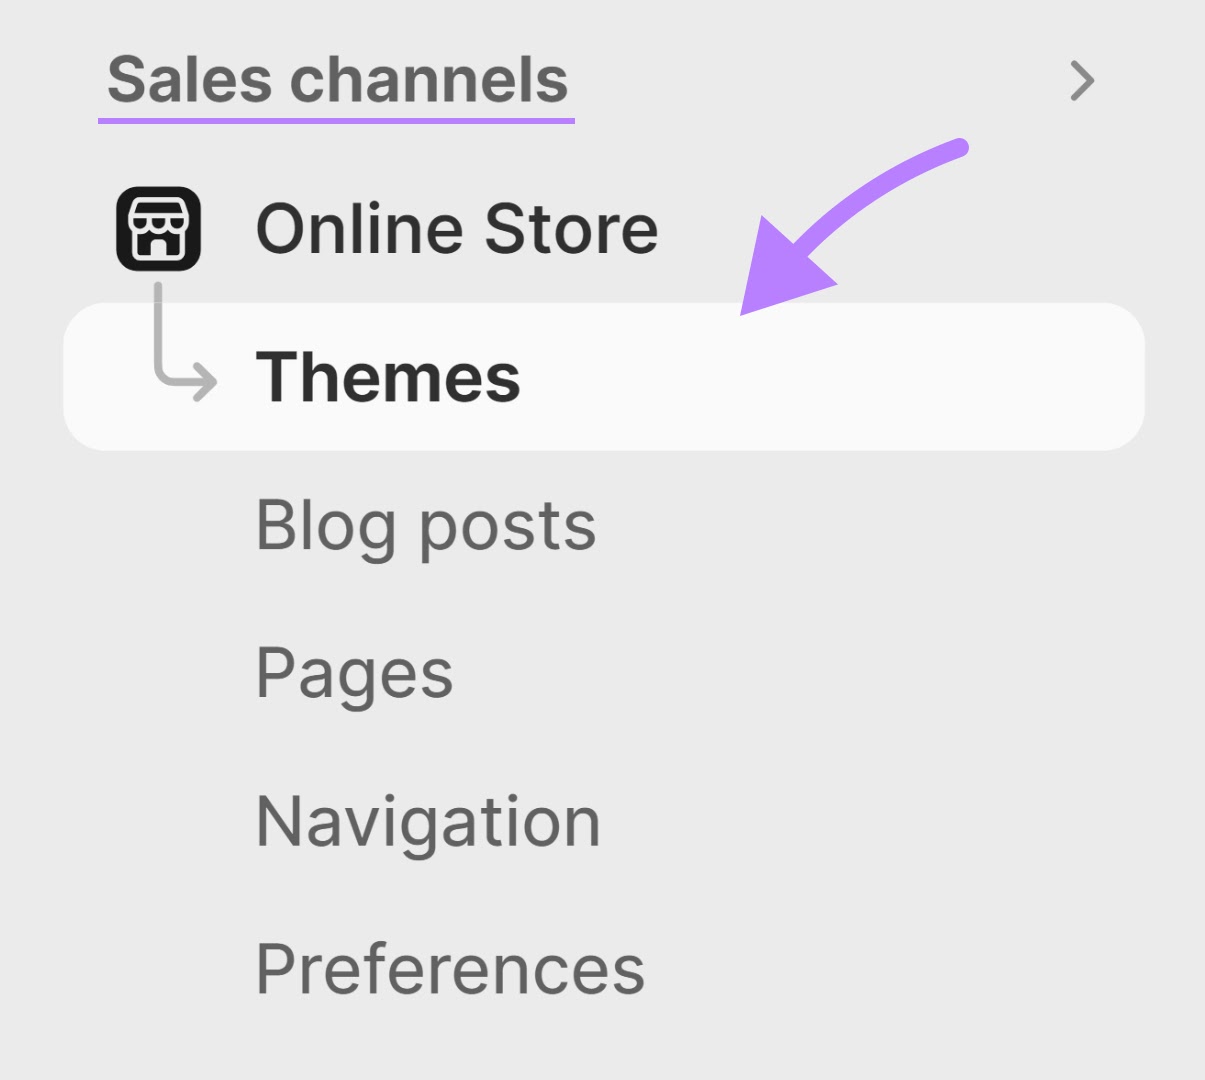 Navigating to "Online Store" > "Themes" successful  Shopify admin dashboard